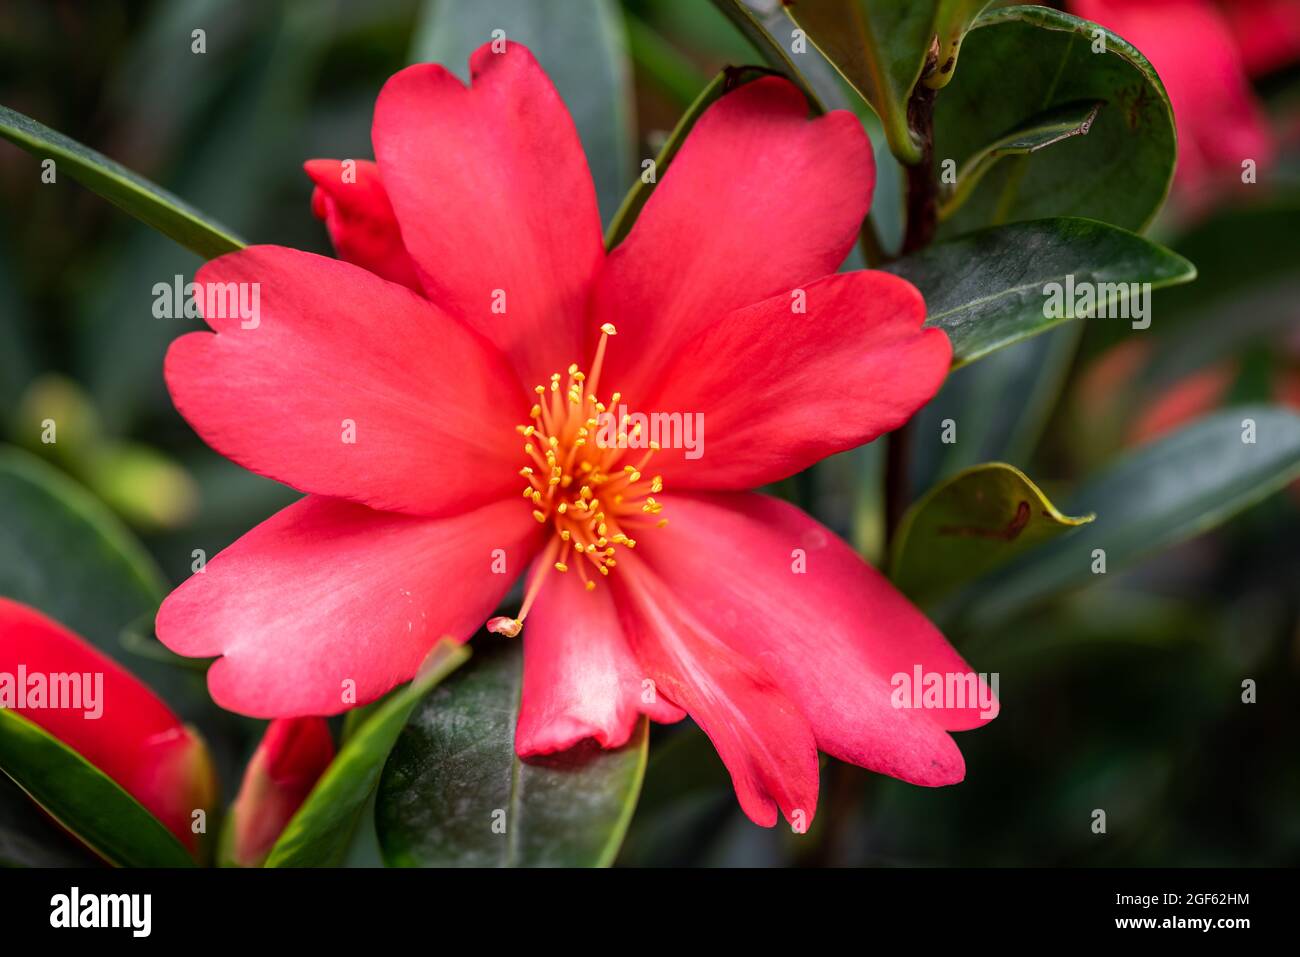 Red camellia azalea flower head close up view in Chengdu, Sichuan province, China Stock Photo